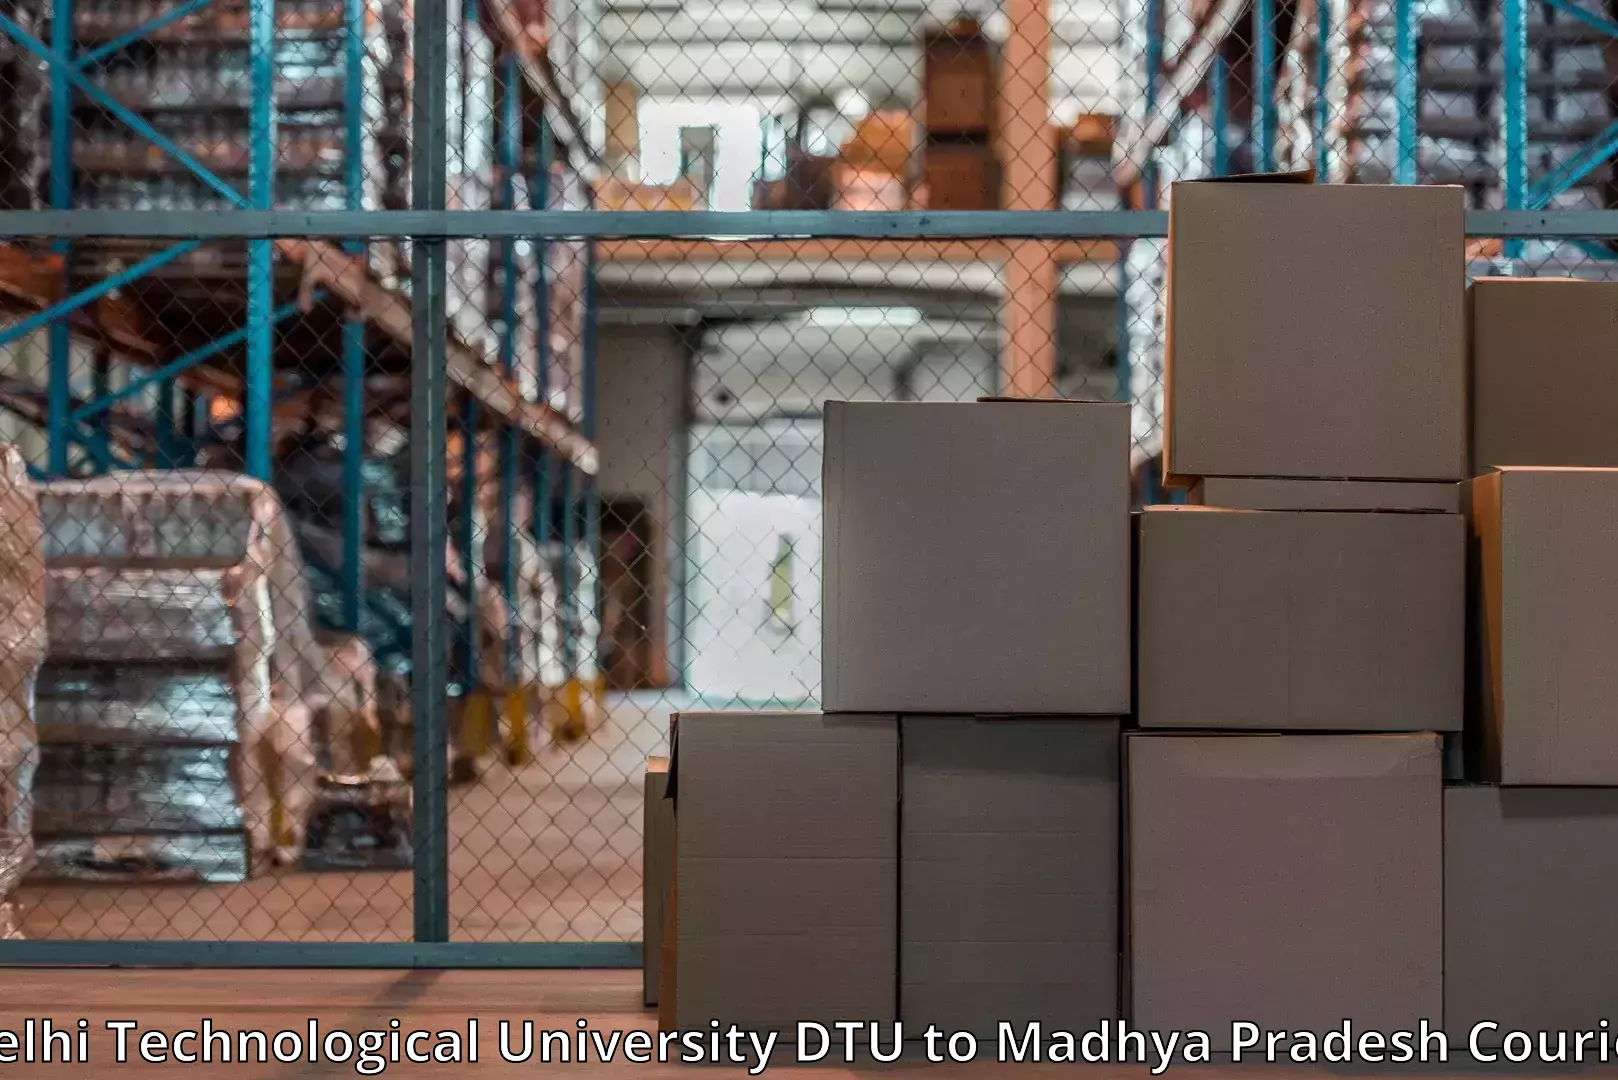 Furniture movers and packers in Delhi Technological University DTU to Sheopur